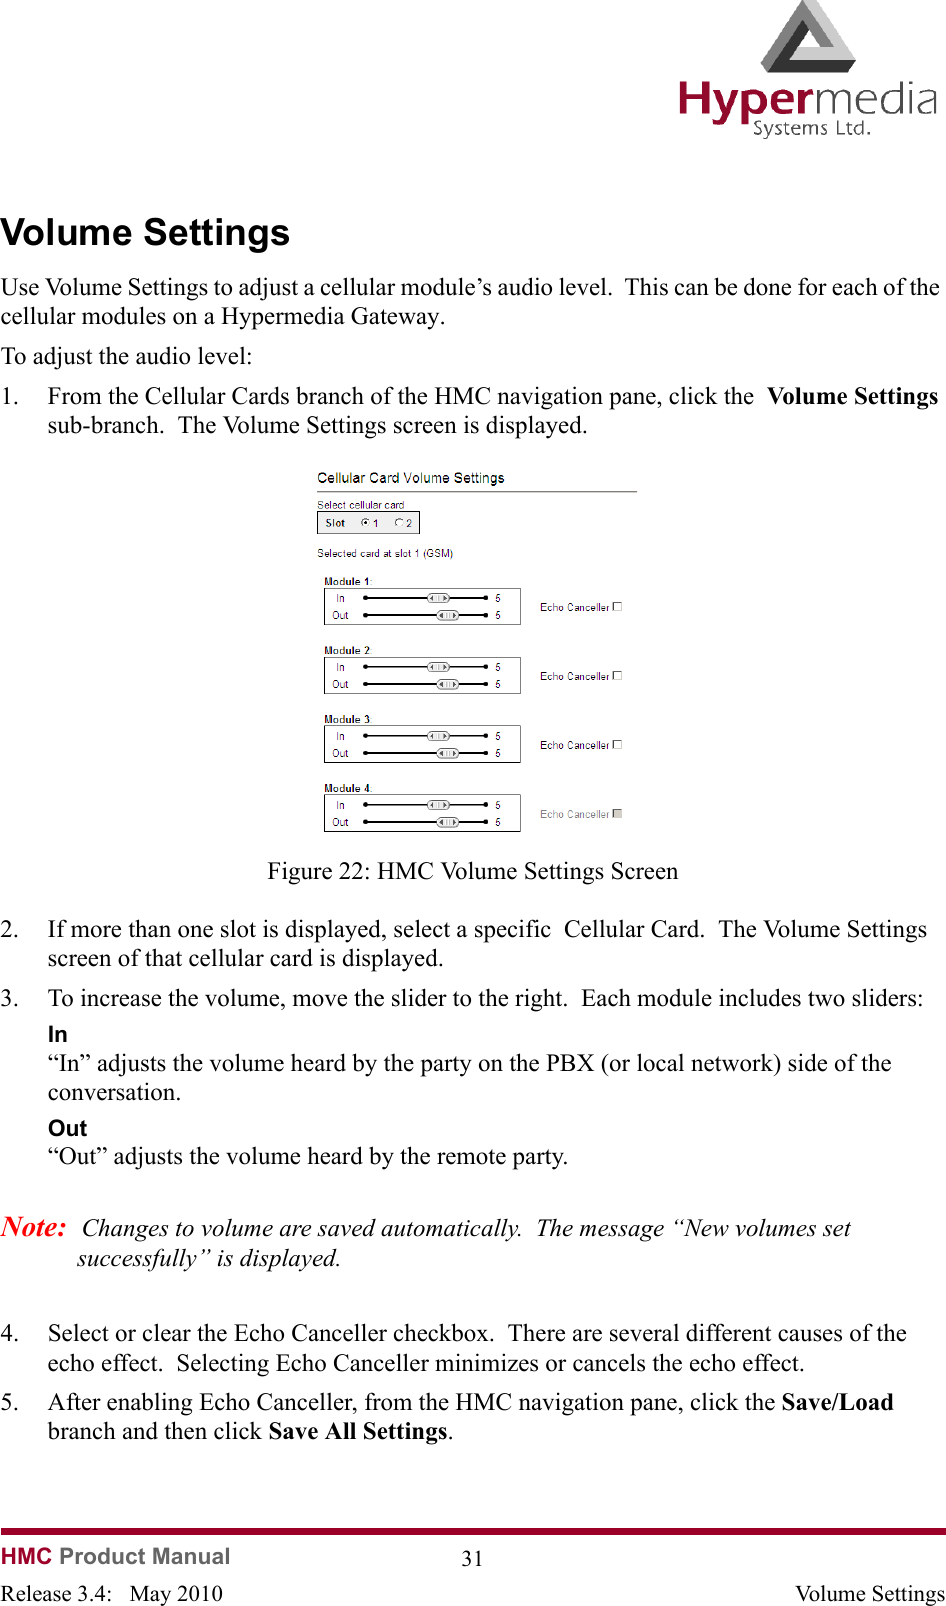 HMC Product Manual  31Release 3.4:   May 2010 Volume SettingsVolume SettingsUse Volume Settings to adjust a cellular module’s audio level.  This can be done for each of the cellular modules on a Hypermedia Gateway.To adjust the audio level:1. From the Cellular Cards branch of the HMC navigation pane, click the  Volume Settings sub-branch.  The Volume Settings screen is displayed.              Figure 22: HMC Volume Settings Screen2. If more than one slot is displayed, select a specific  Cellular Card.  The Volume Settings screen of that cellular card is displayed.3. To increase the volume, move the slider to the right.  Each module includes two sliders:In“In” adjusts the volume heard by the party on the PBX (or local network) side of the conversation.Out“Out” adjusts the volume heard by the remote party.Note:  Changes to volume are saved automatically.  The message “New volumes set successfully” is displayed.4. Select or clear the Echo Canceller checkbox.  There are several different causes of the echo effect.  Selecting Echo Canceller minimizes or cancels the echo effect.5. After enabling Echo Canceller, from the HMC navigation pane, click the Save/Load branch and then click Save All Settings.  